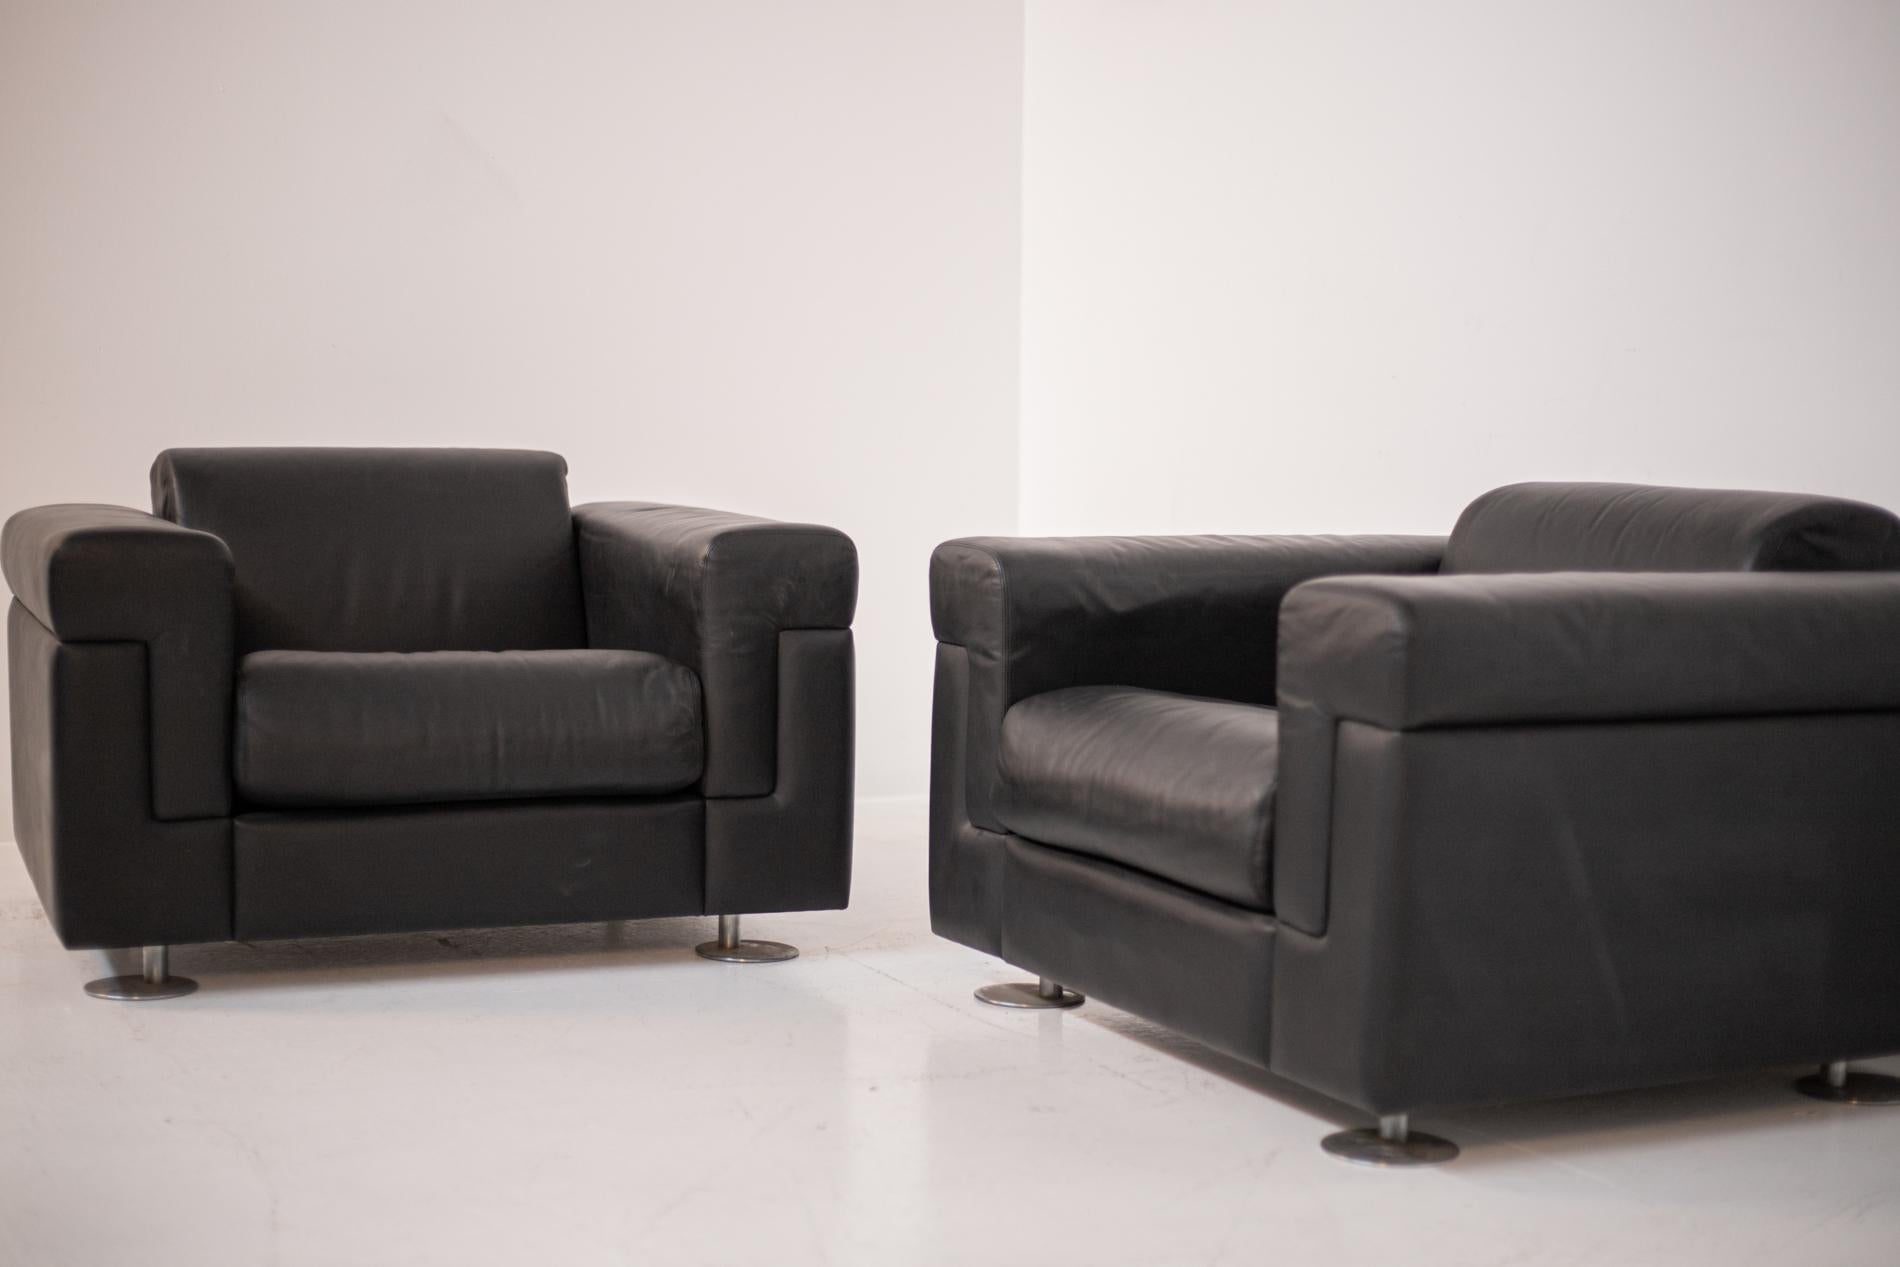 Mid-20th Century Osvaldo Borsani for Tecno Pairs of Armchairs in Black Leather, Mod D120 For Sale